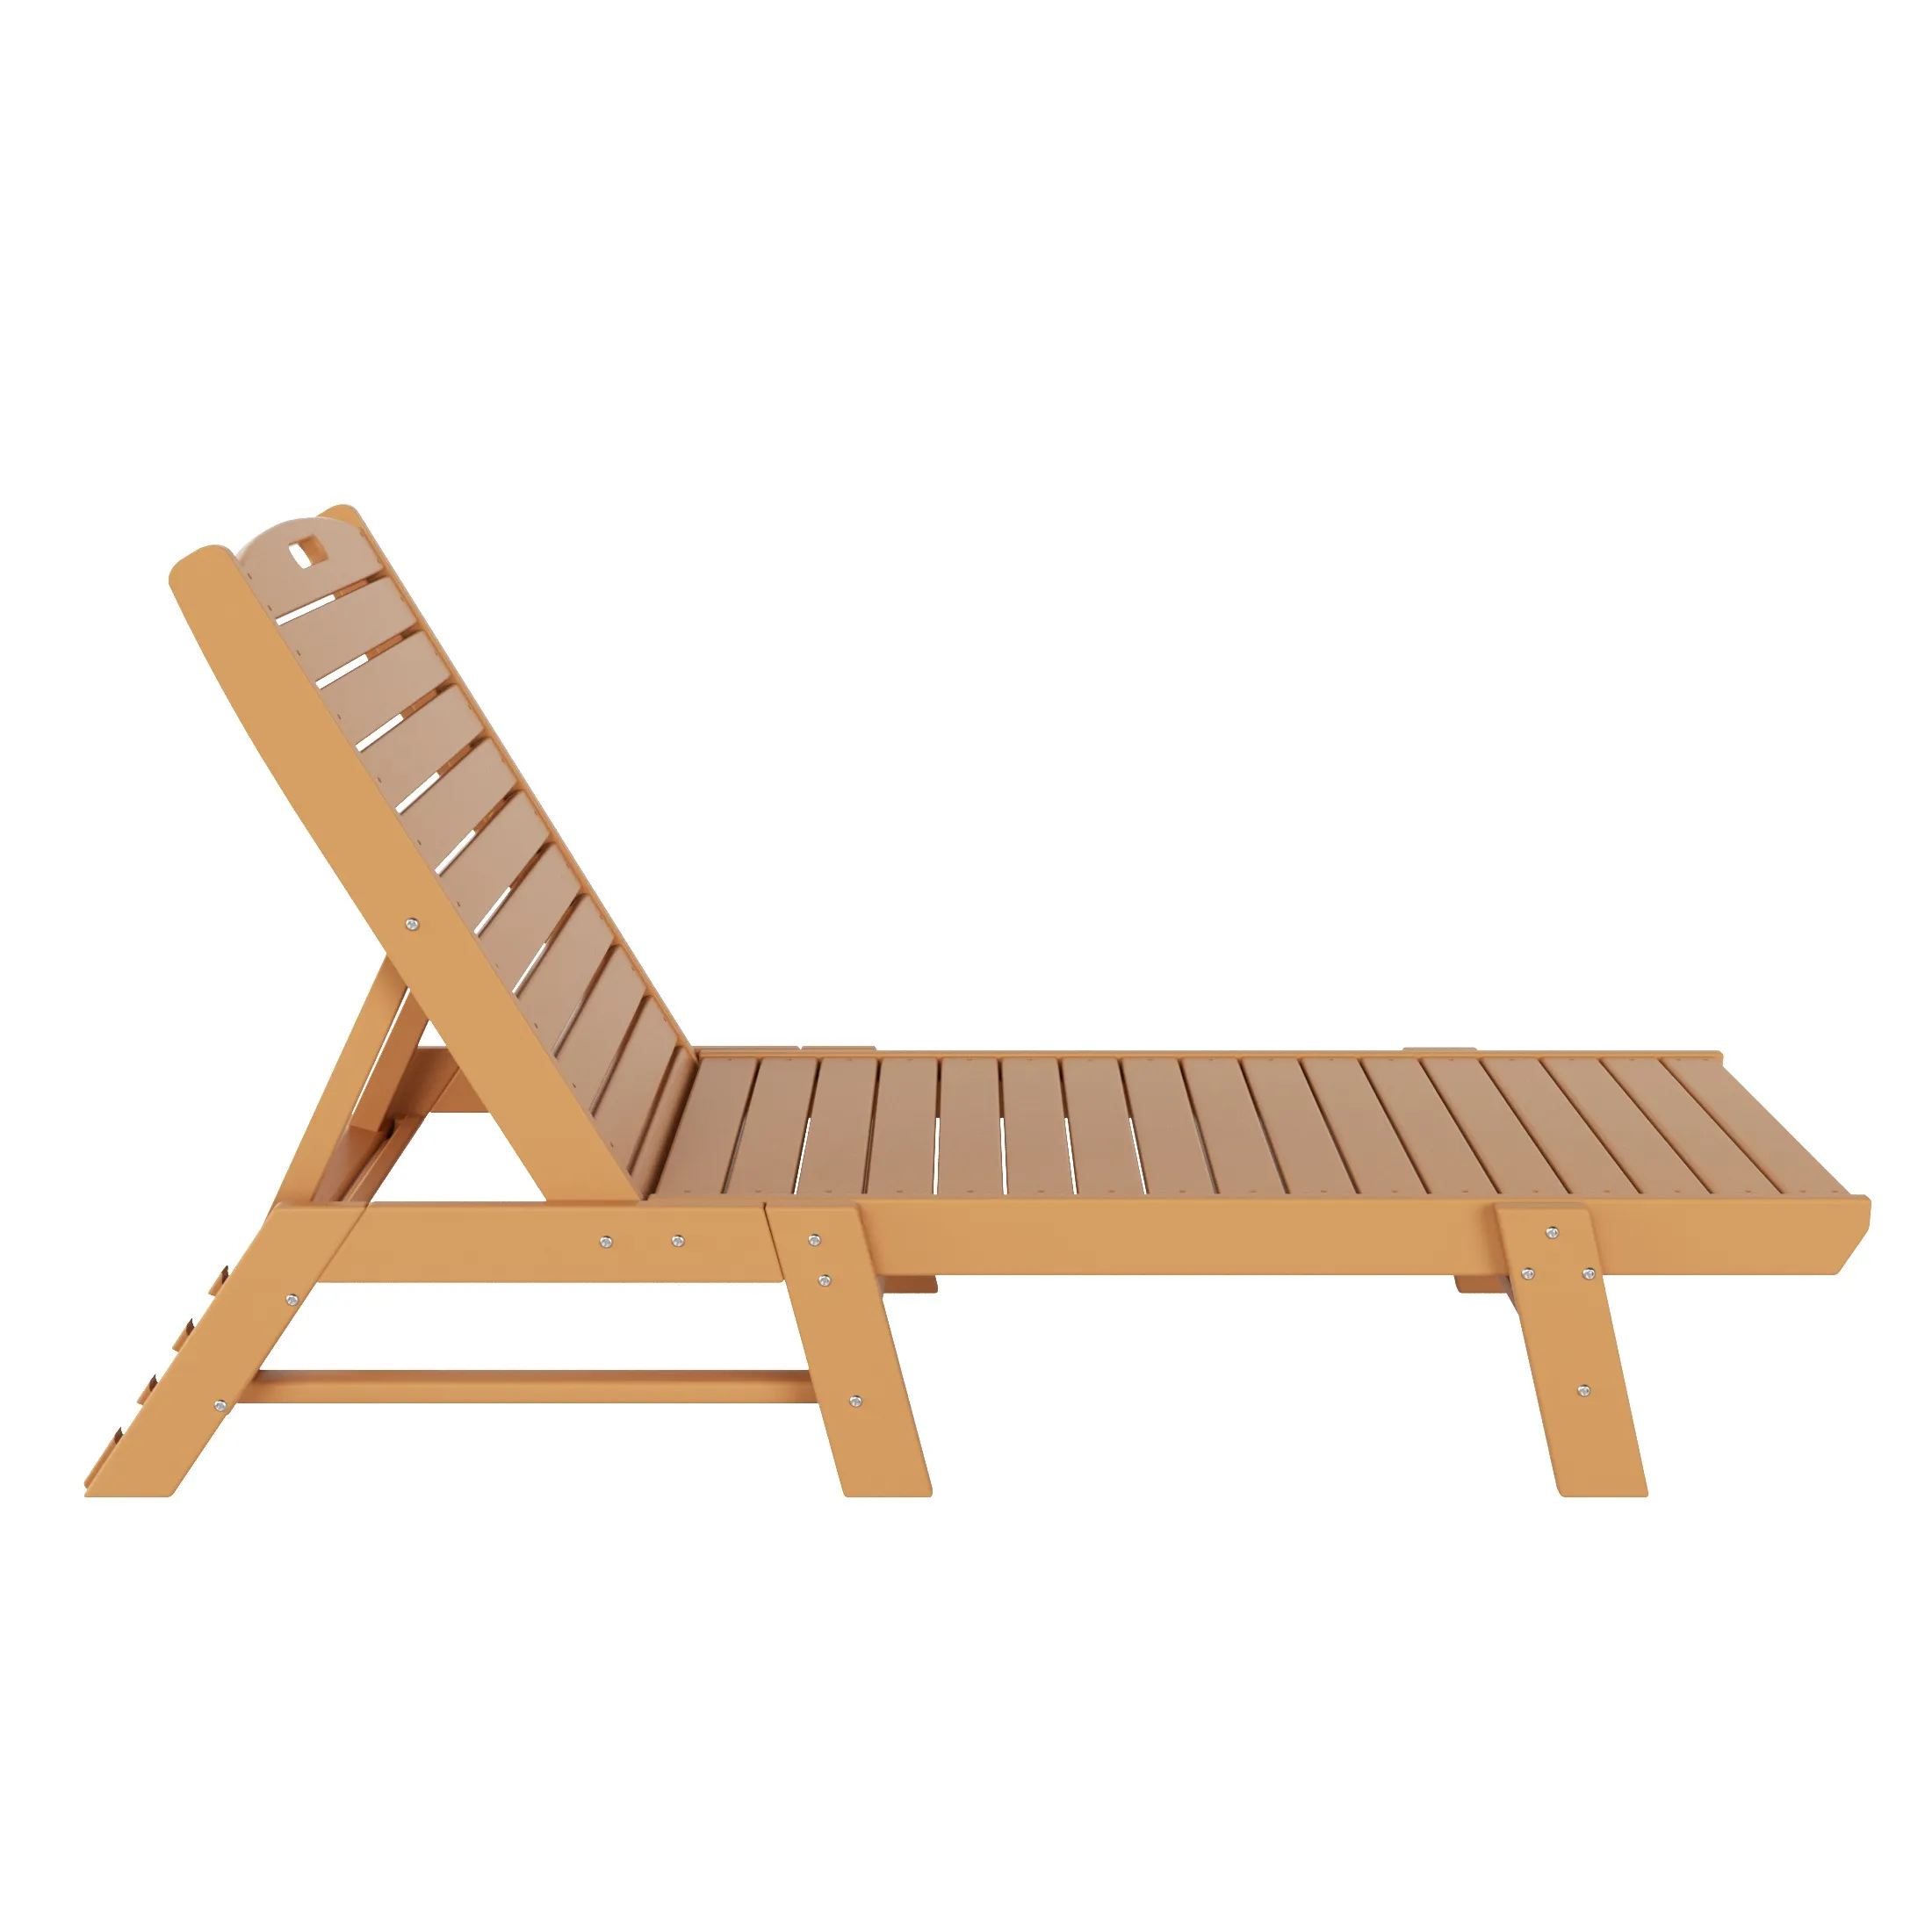 Reclining Outdoor Patio Adjustable Chaise Lounge Chair